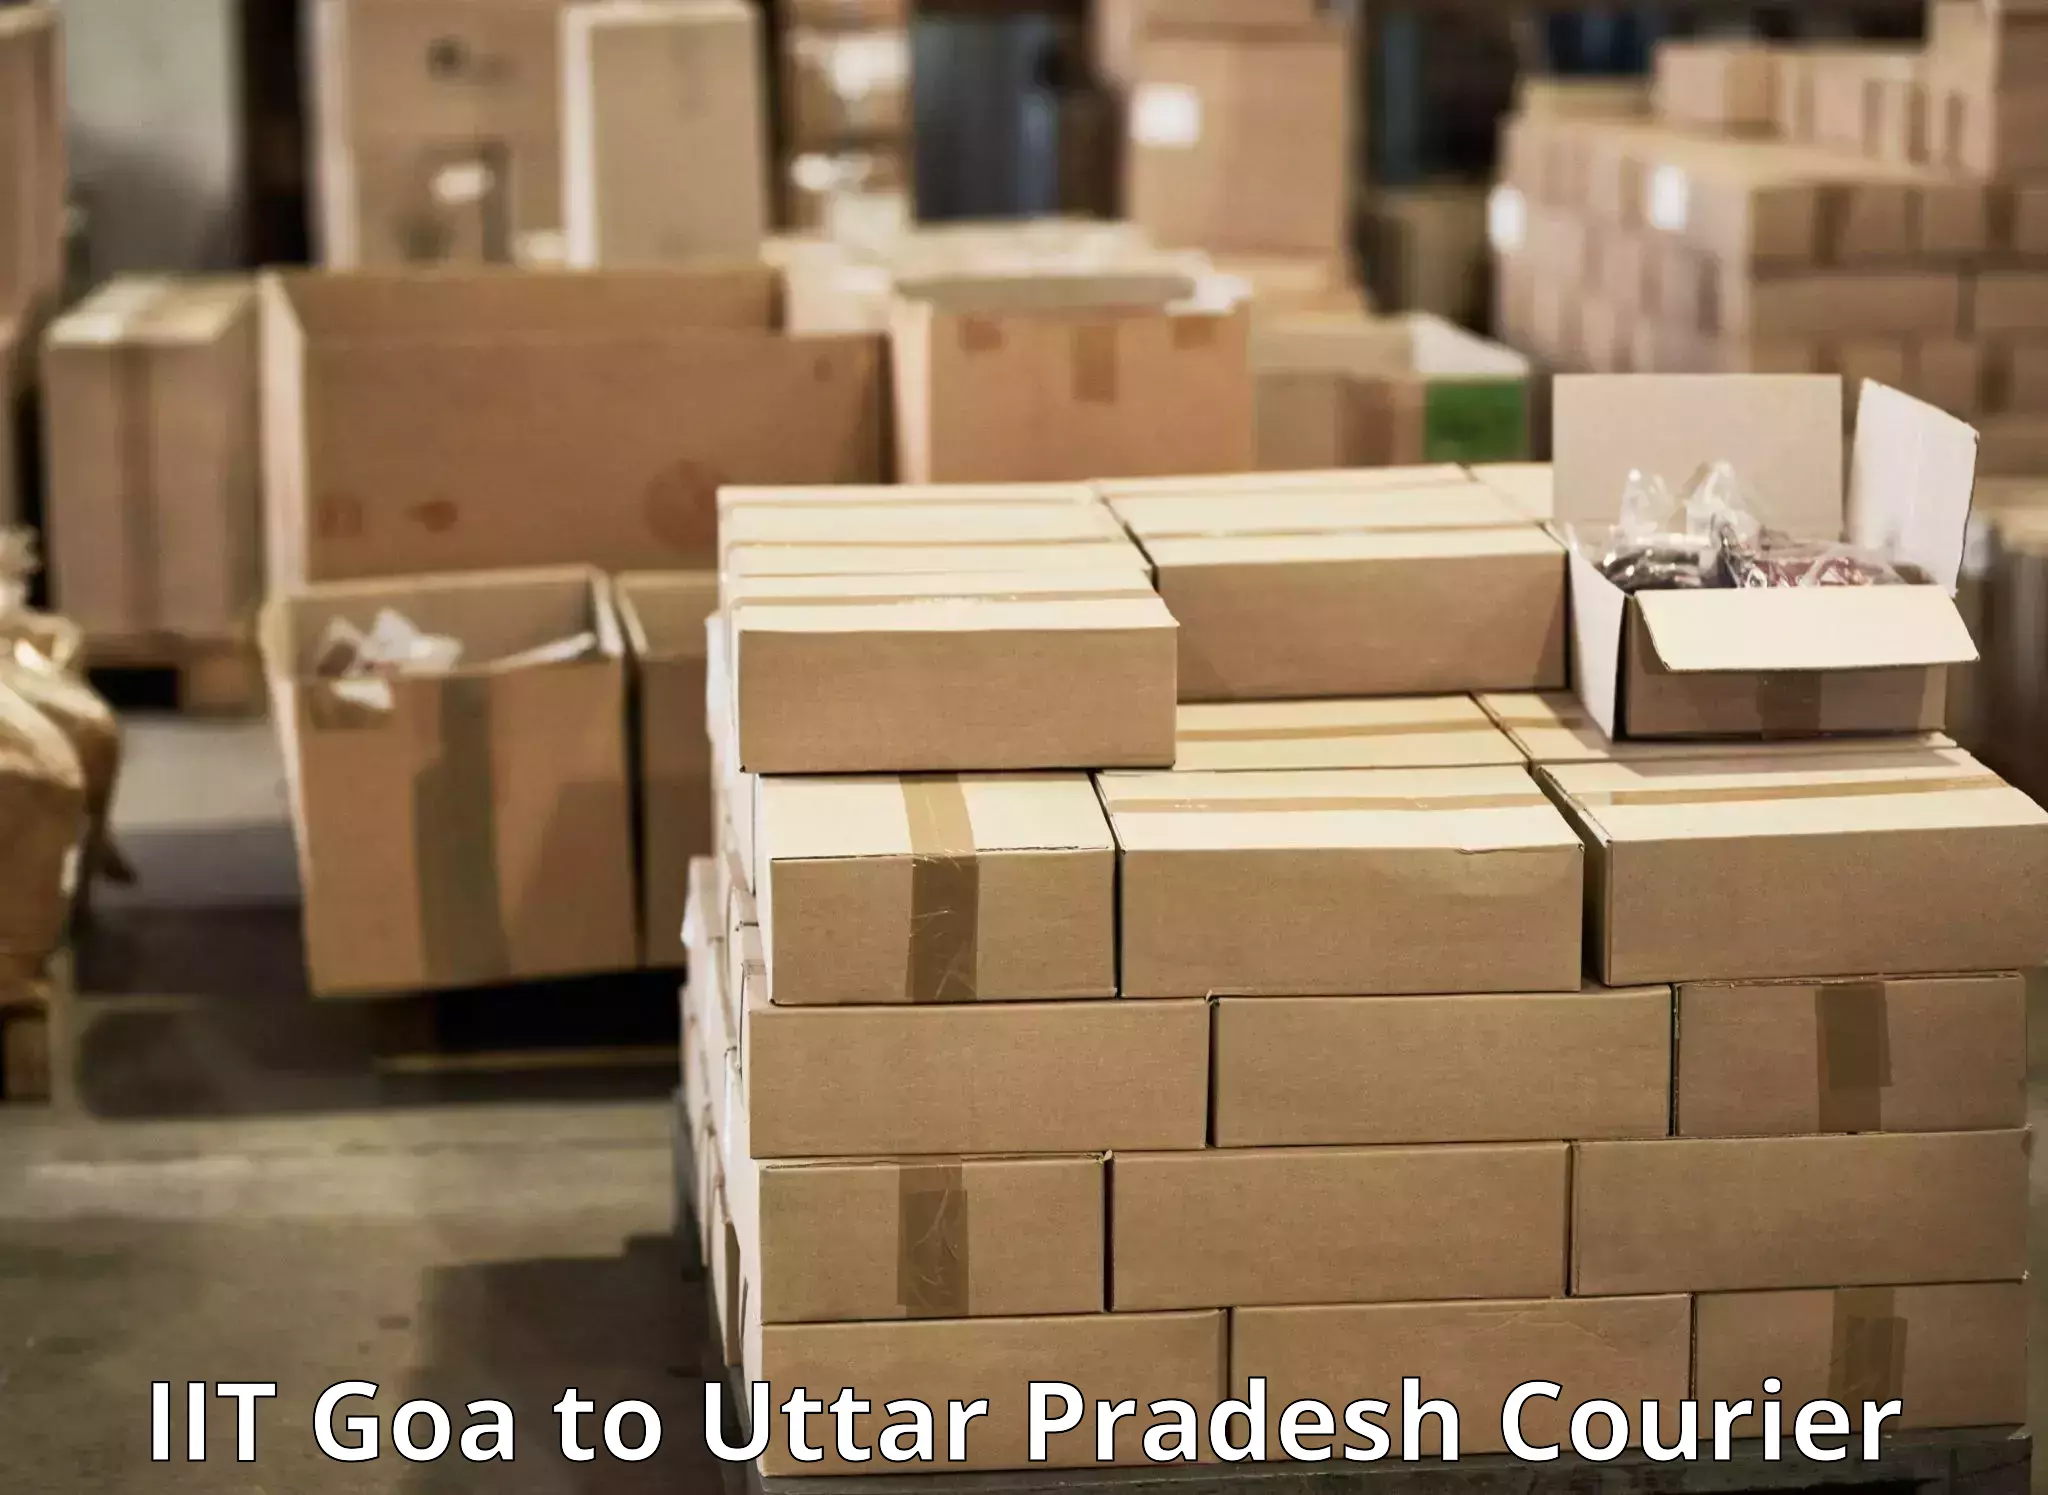 Expedited shipping methods IIT Goa to Kanth